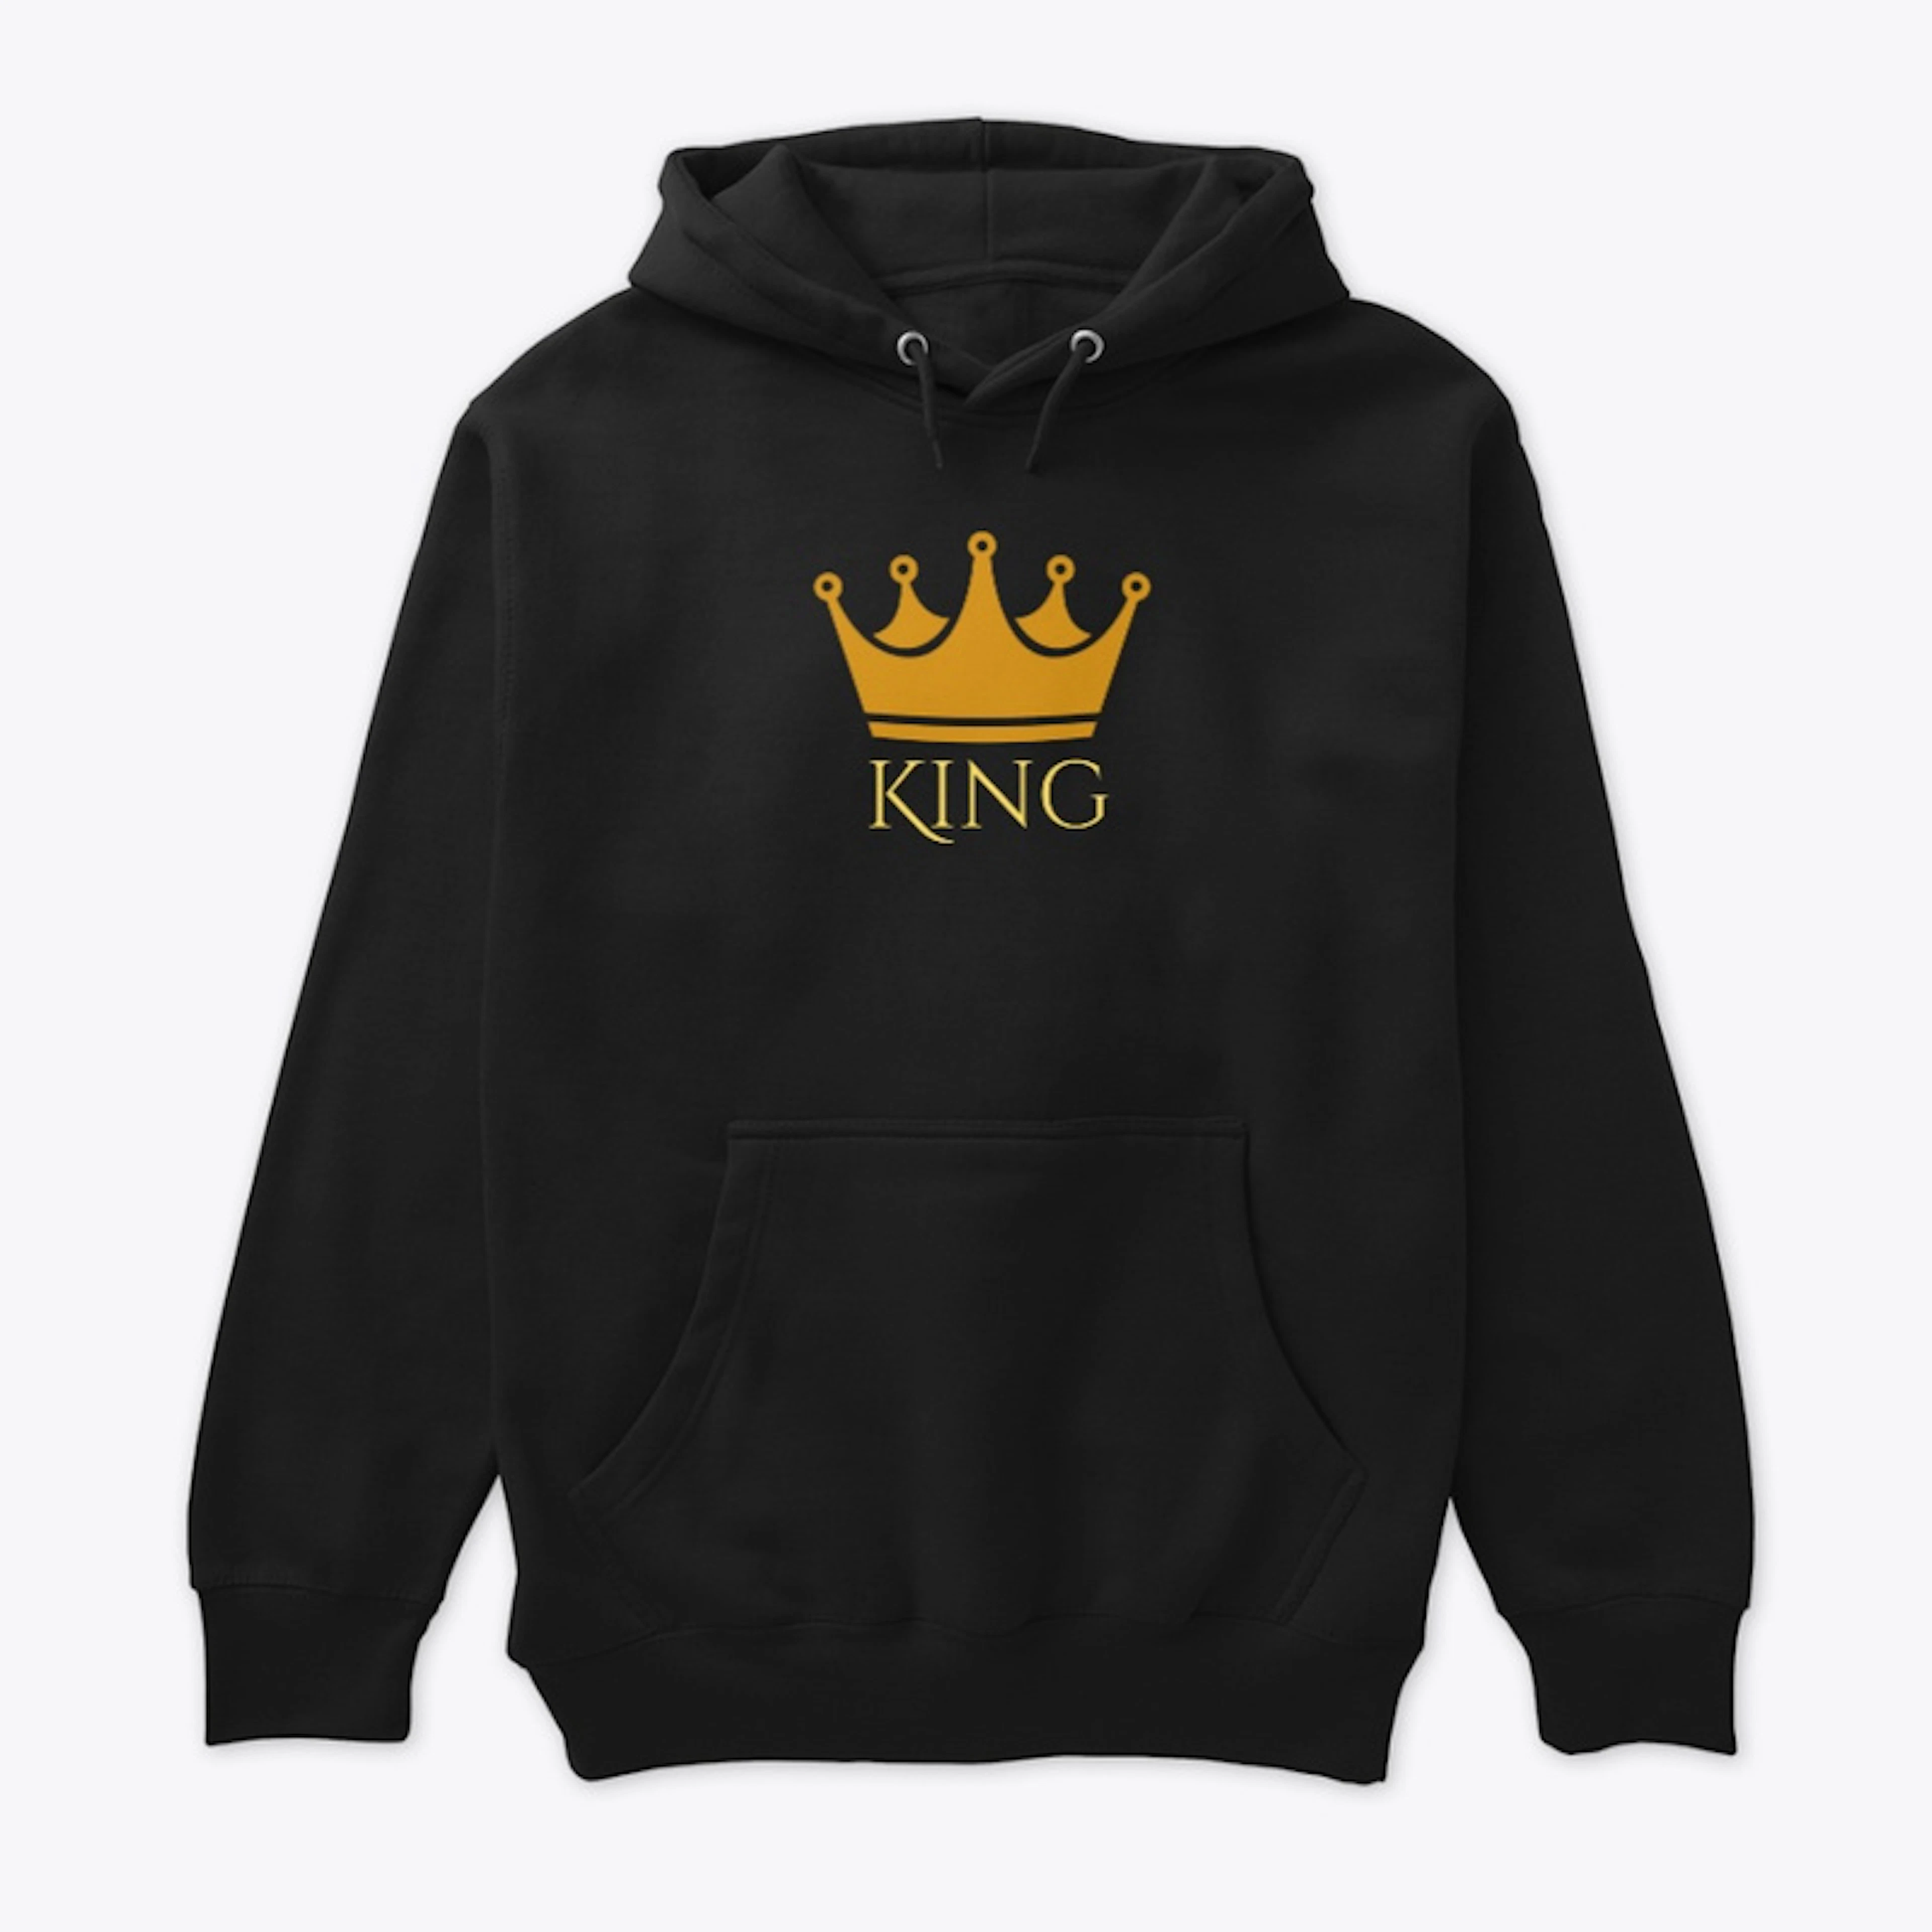 Beautiful Hoodie Design For Males!!!